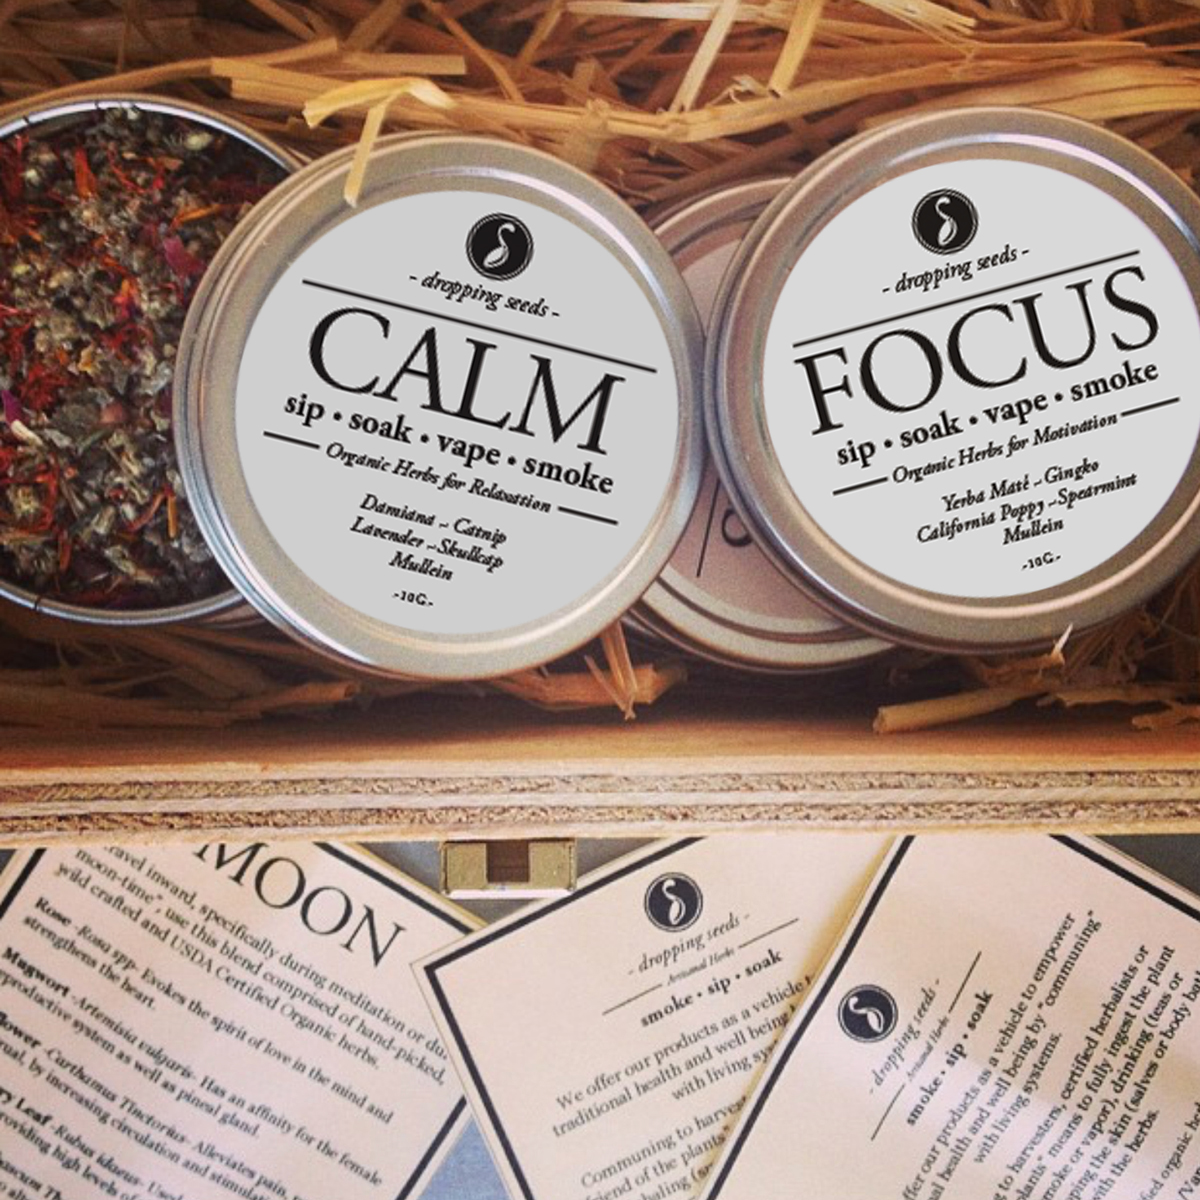 CALM and FOCUS first organic herbal blends.